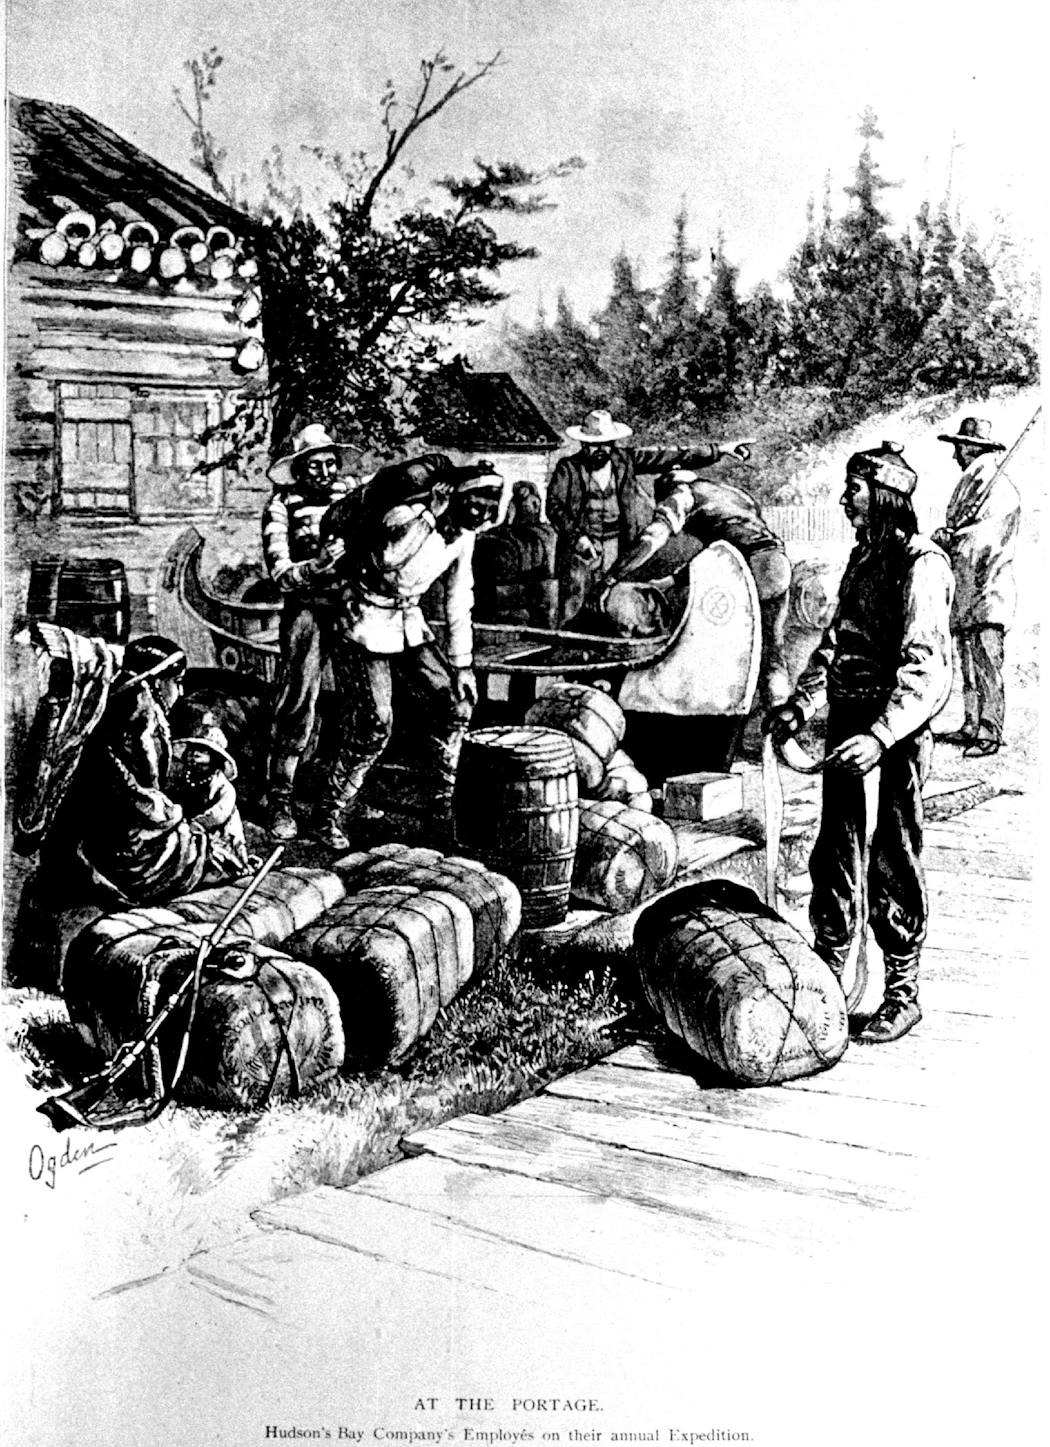 A depiction of Hudson Bay Company’s men on their annual expedition.